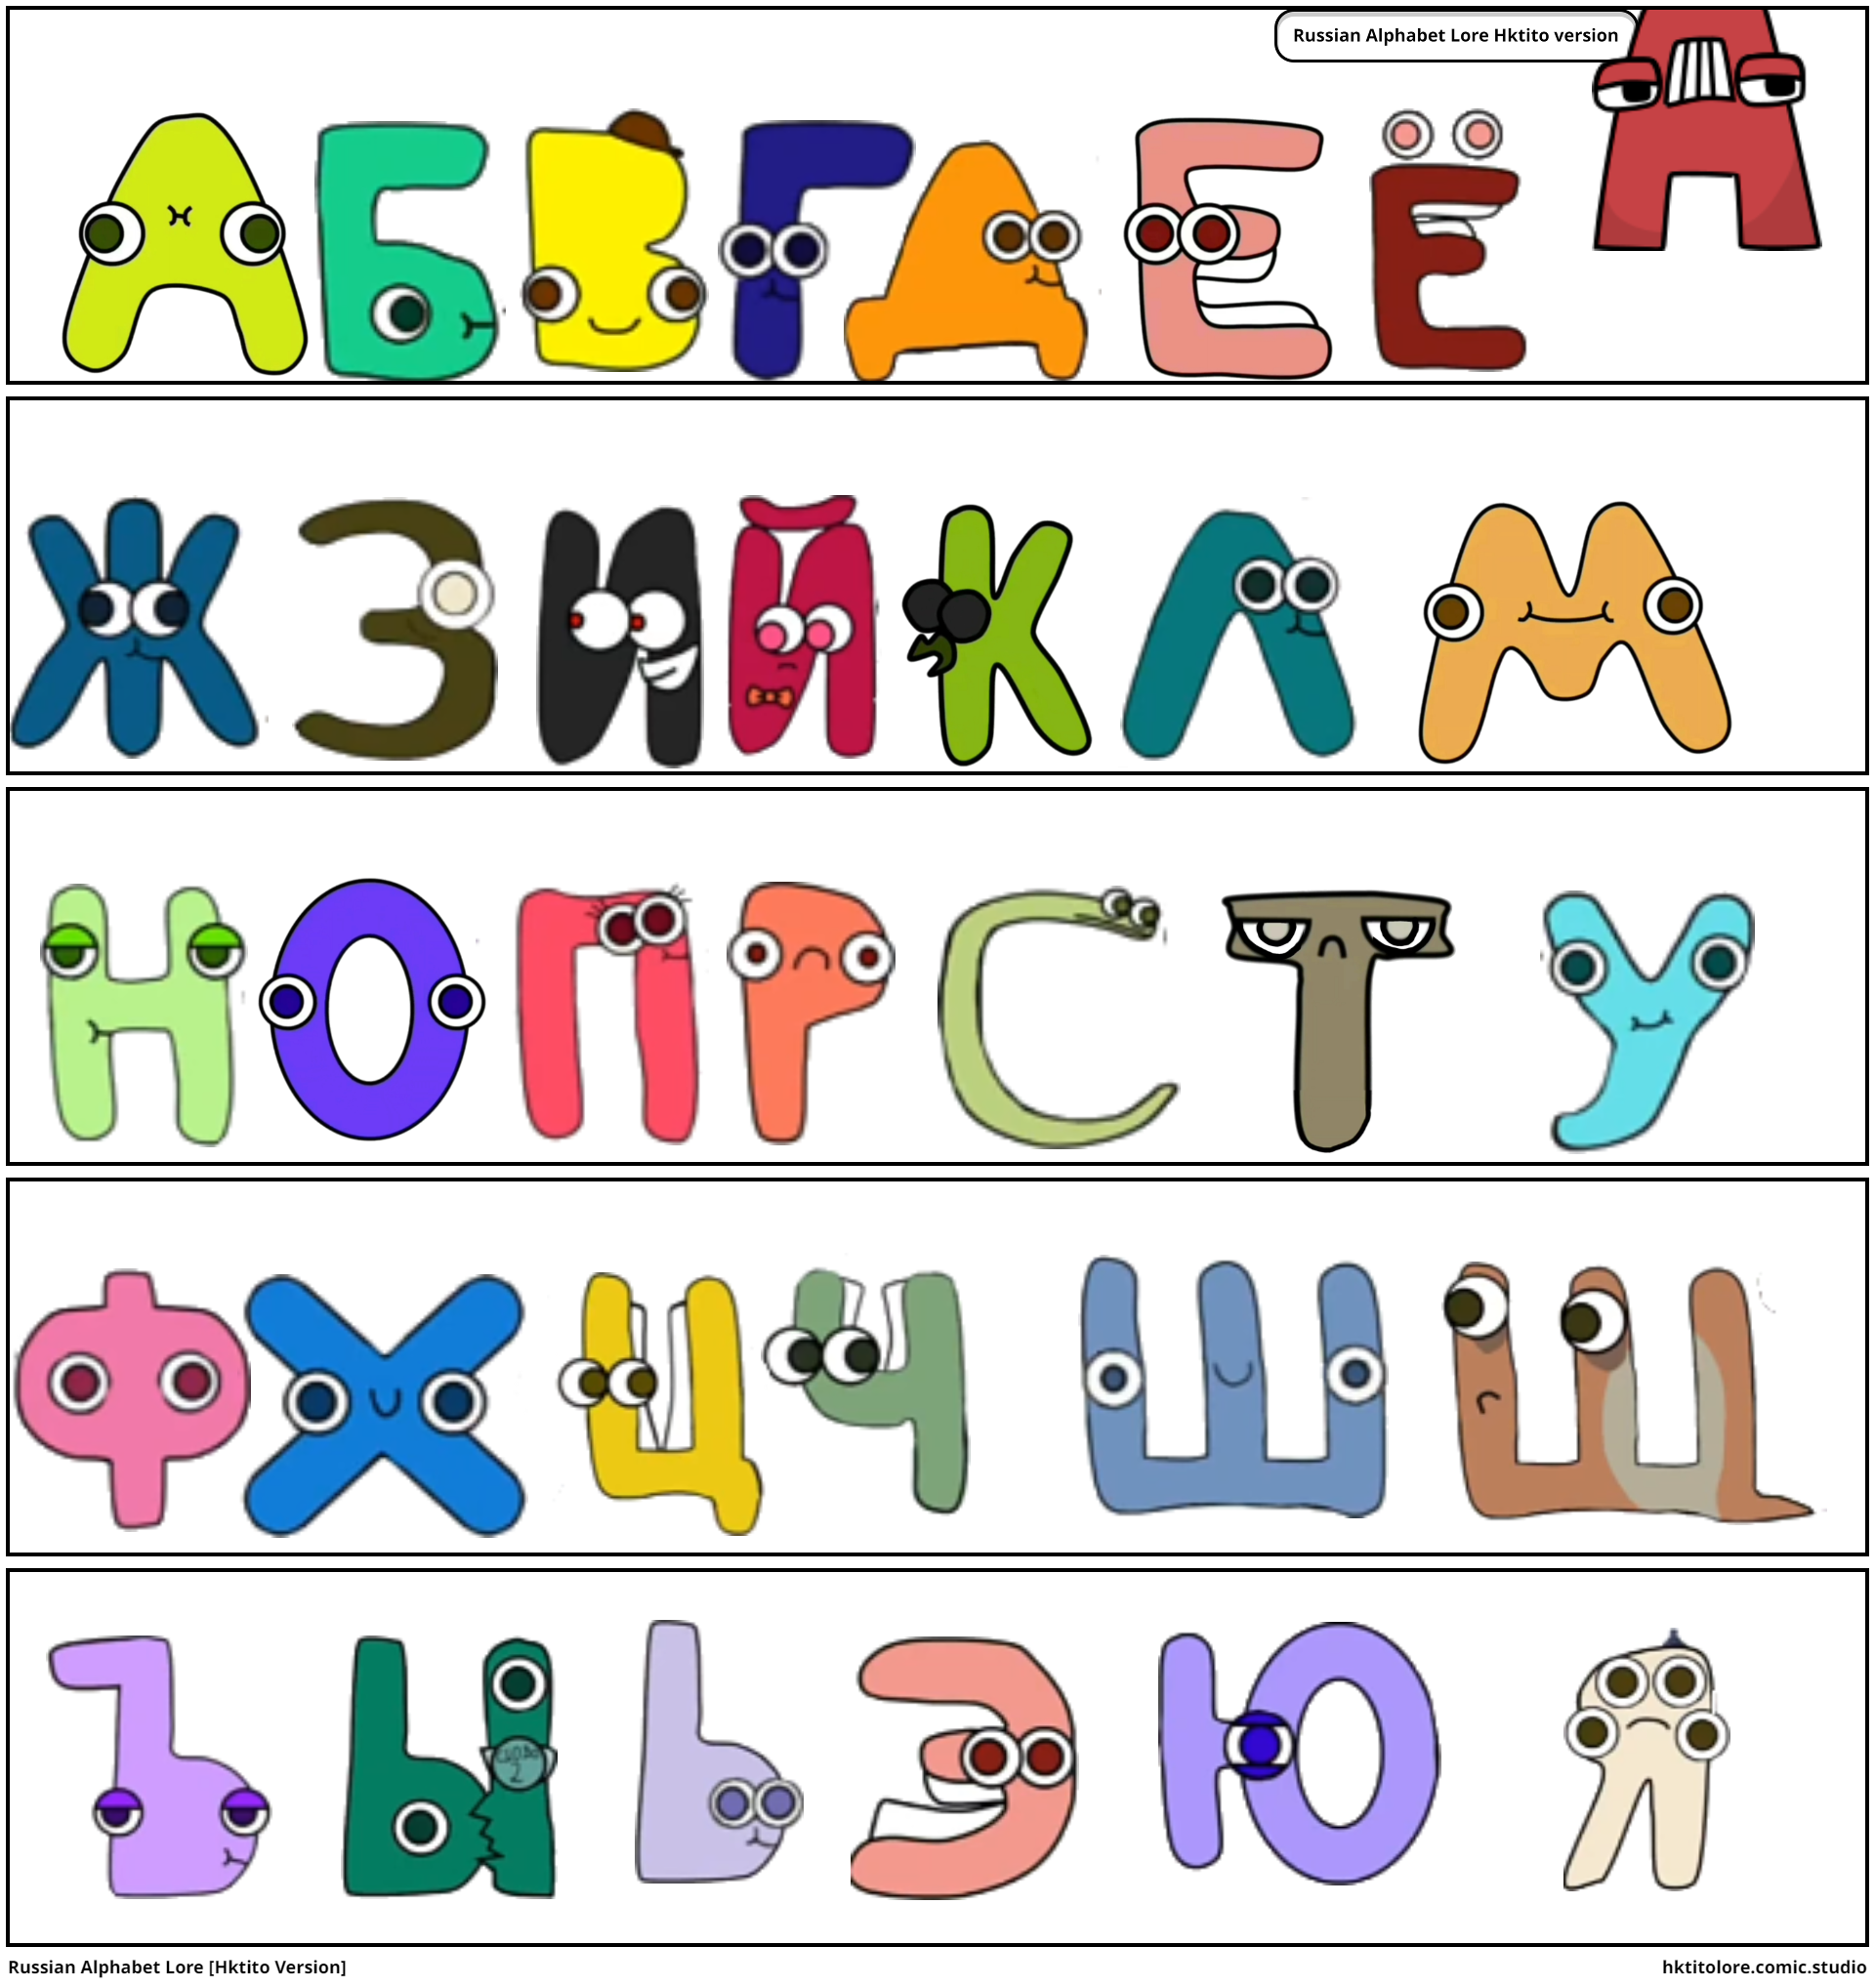 Russian Alphabet Lore but with HKtito Number Lore - Comic Studio